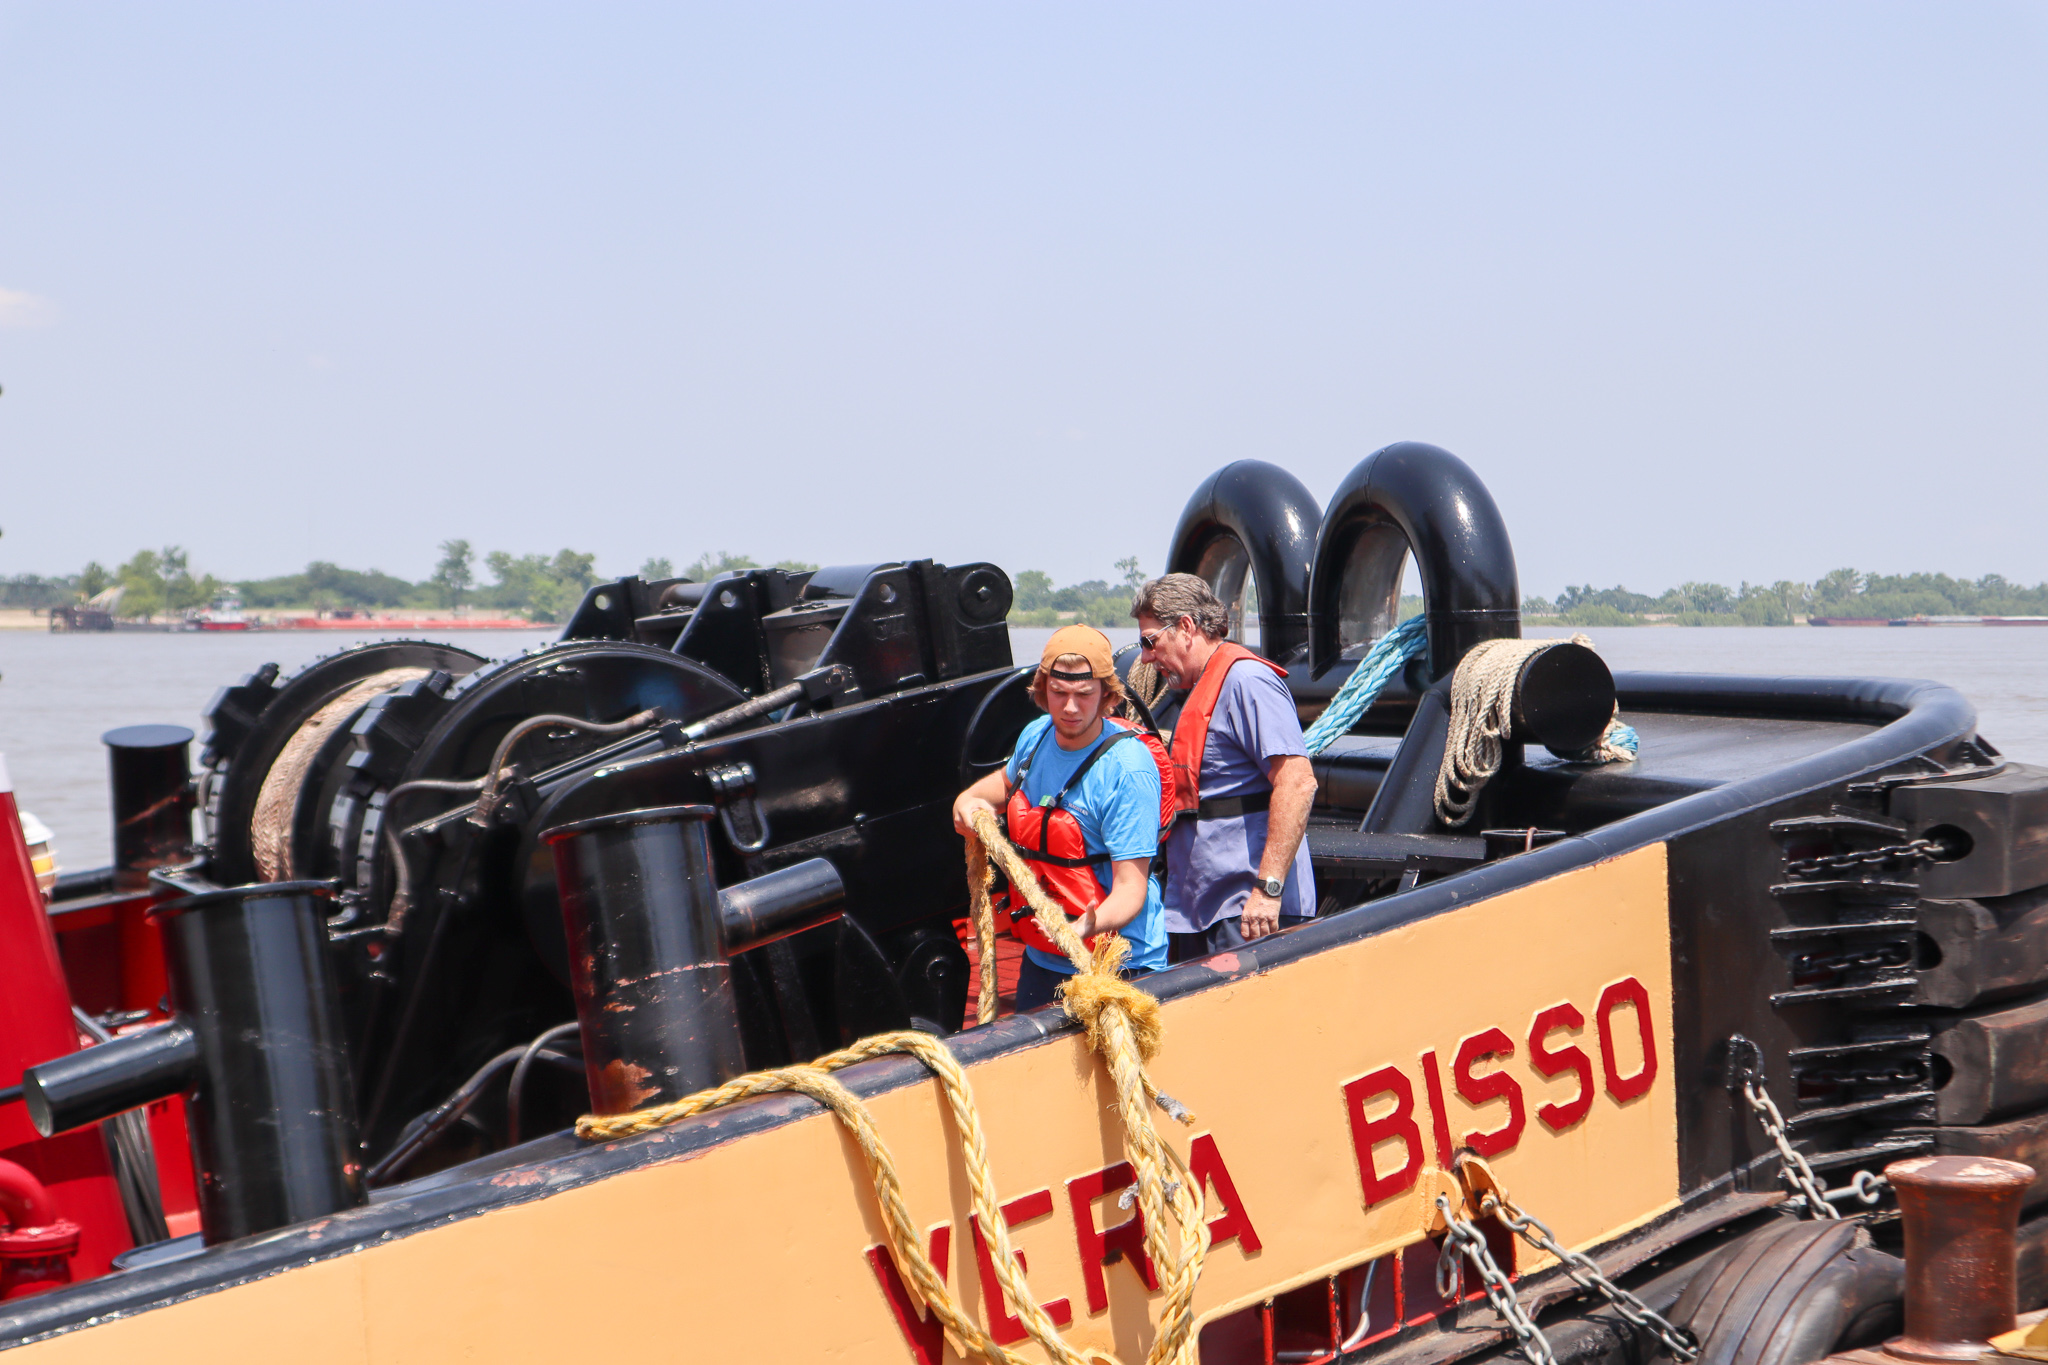 Working on a tug or towboat is ‘cool’